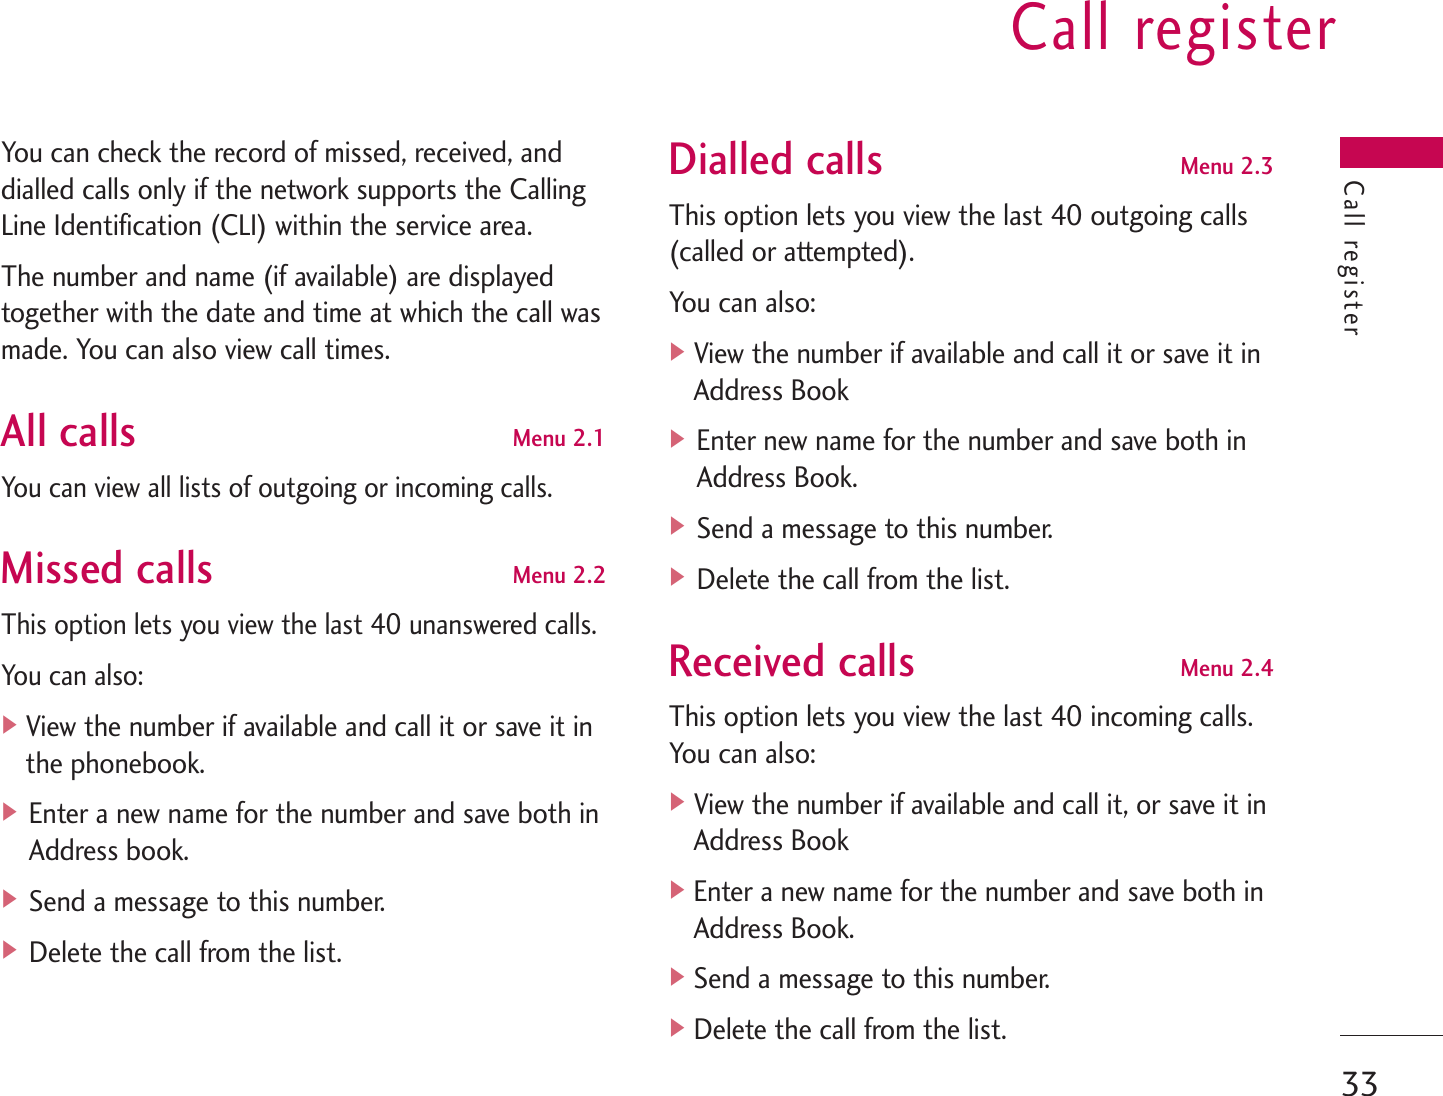 Call register33Call registerYou can check the record of missed, received, anddialled calls only if the network supports the CallingLine Identification (CLI) within the service area.The number and name (if available) are displayedtogether with the date and time at which the call wasmade. You can also view call times.All callsMenu 2.1You can view all lists of outgoing or incoming calls.Missed callsMenu 2.2This option lets you view the last 40 unanswered calls.You can also:]View the number if available and call it or save it inthe phonebook.] Enter a new name for the number and save both inAddress book.] Send a message to this number.] Delete the call from the list.Dialled callsMenu 2.3This option lets you view the last 40 outgoing calls(called or attempted). You can also:]View the number if available and call it or save it inAddress Book] Enter new name for the number and save both inAddress Book.] Send a message to this number.] Delete the call from the list.Received callsMenu 2.4This option lets you view the last 40 incoming calls.You can also:]View the number if available and call it, or save it inAddress Book]Enter a new name for the number and save both inAddress Book.]Send a message to this number.]Delete the call from the list.